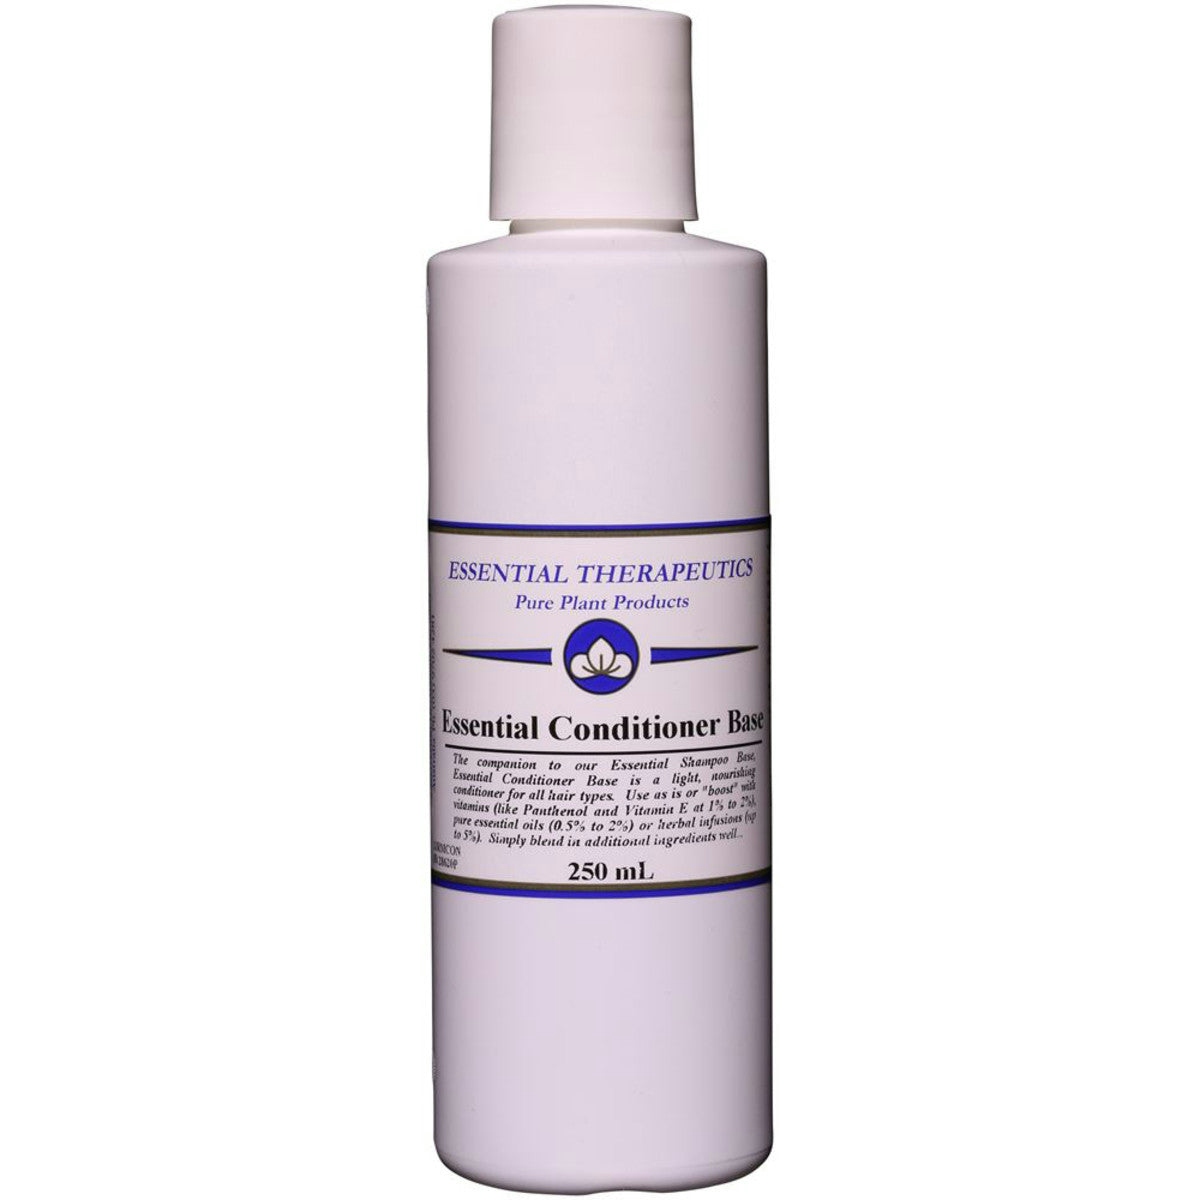 image of Essential Therapeutics Essential Conditioner Base 250ml on white background